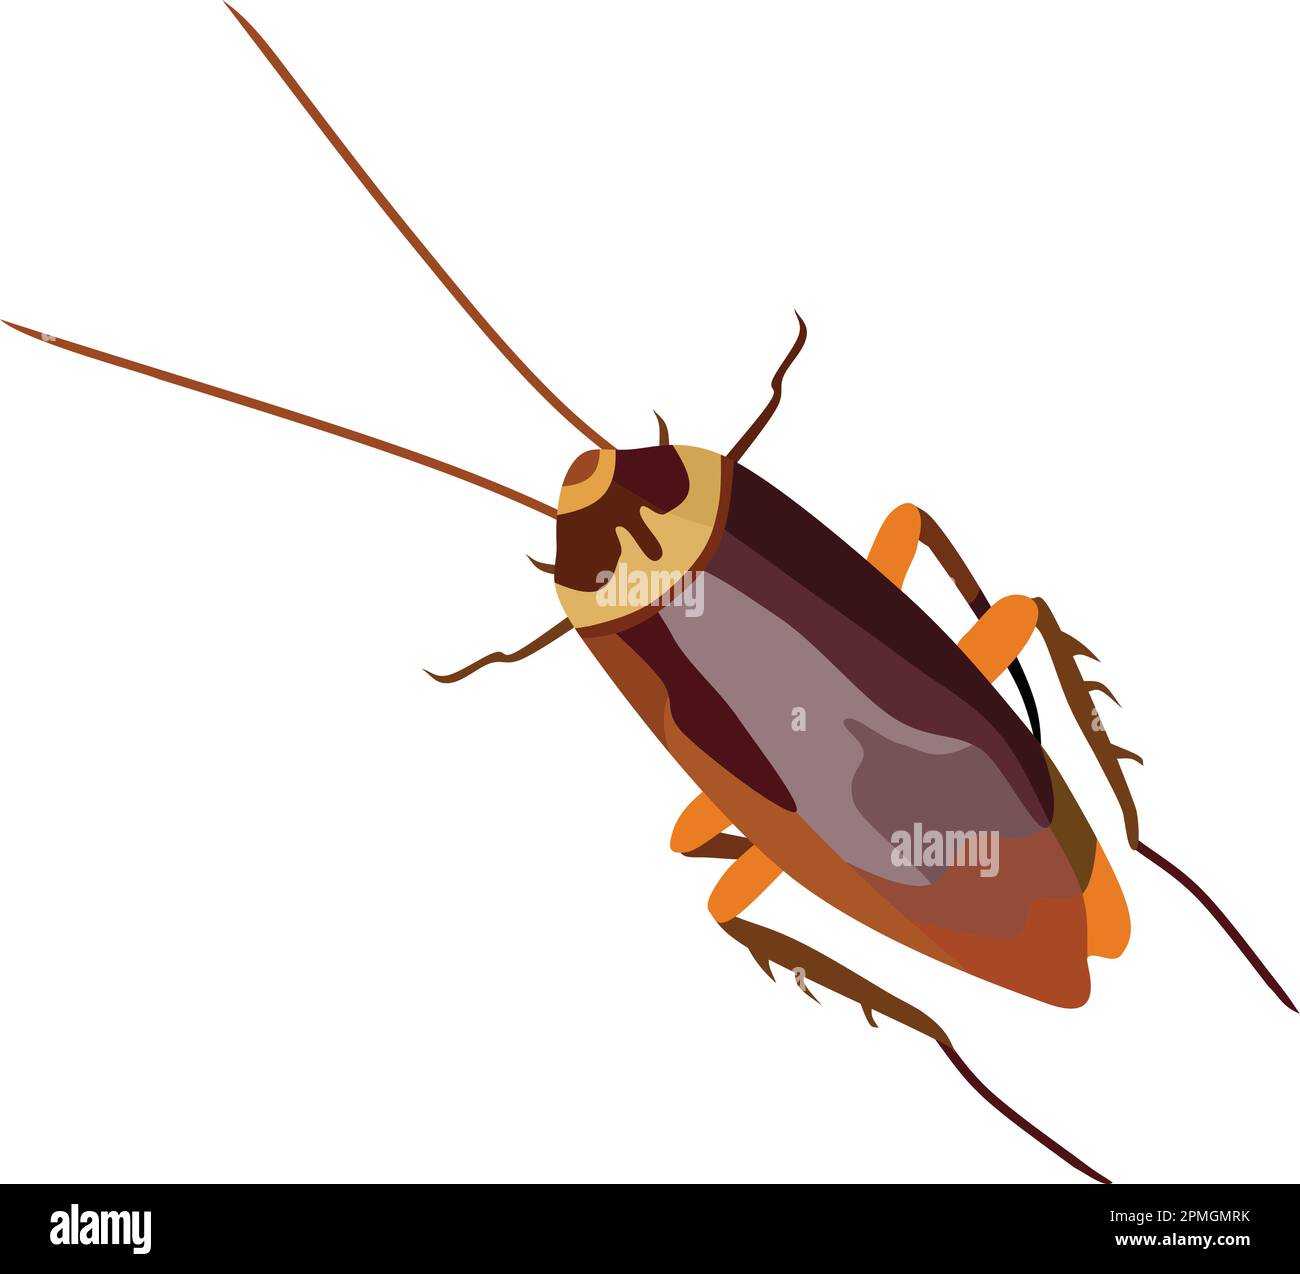 Cockroach Insect Animal Vector Stock Vector Image & Art - Alamy